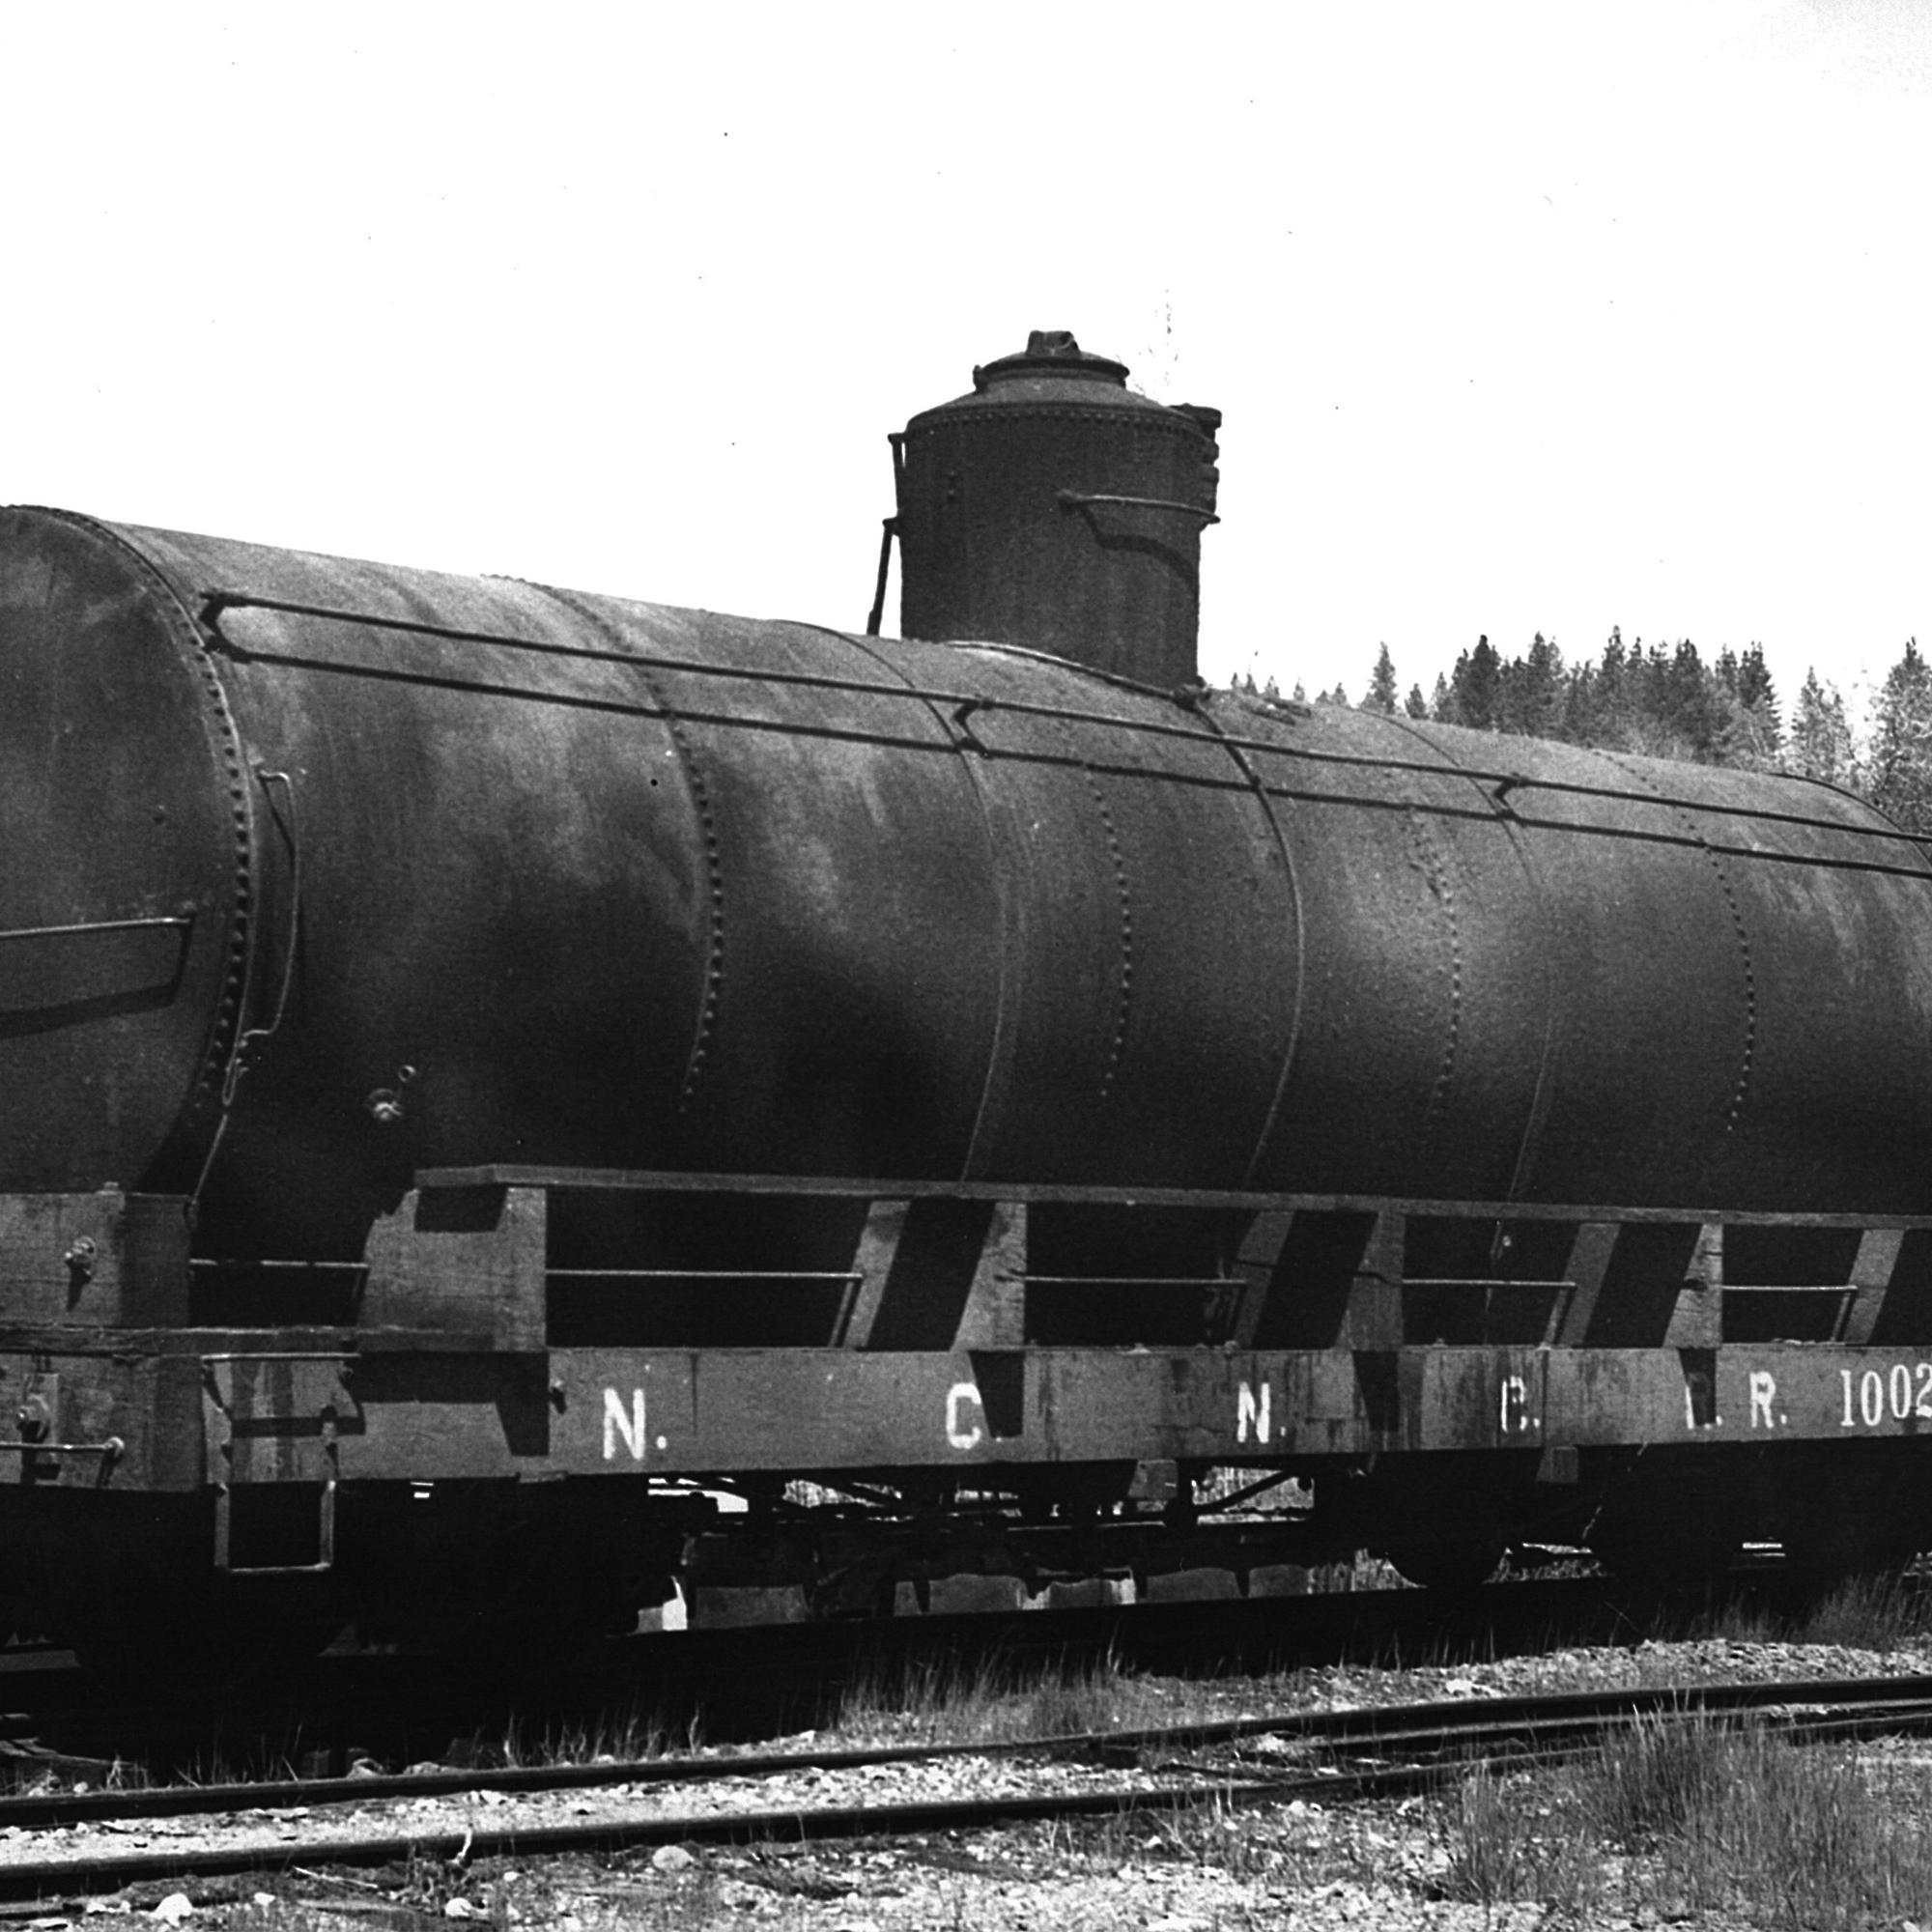 Tank Car #1002 in Grass Valley